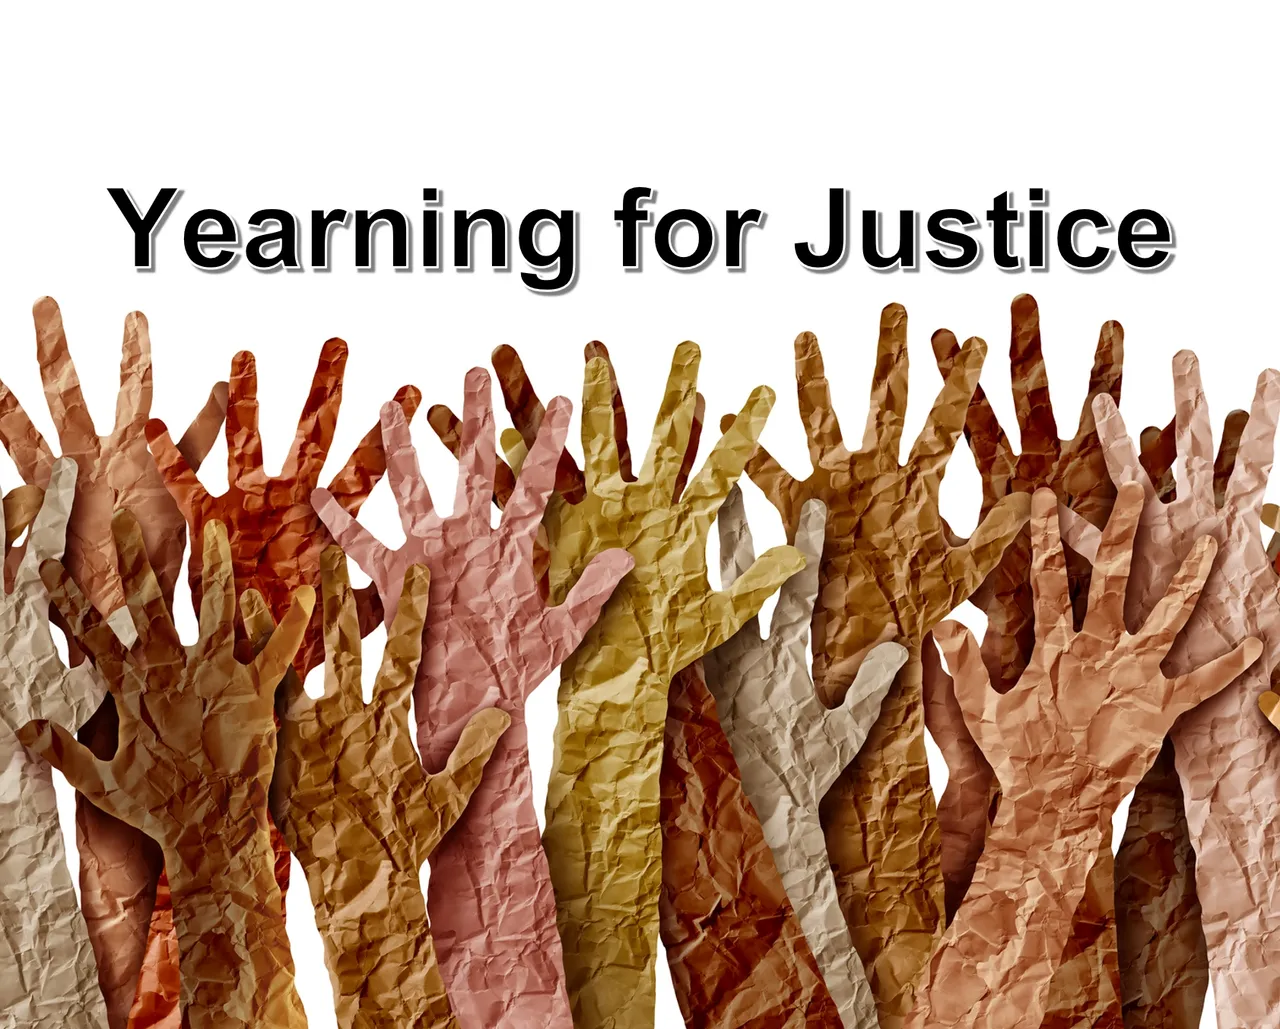 Number of hands pointing up with the words “Yearning for Justice” written on the top